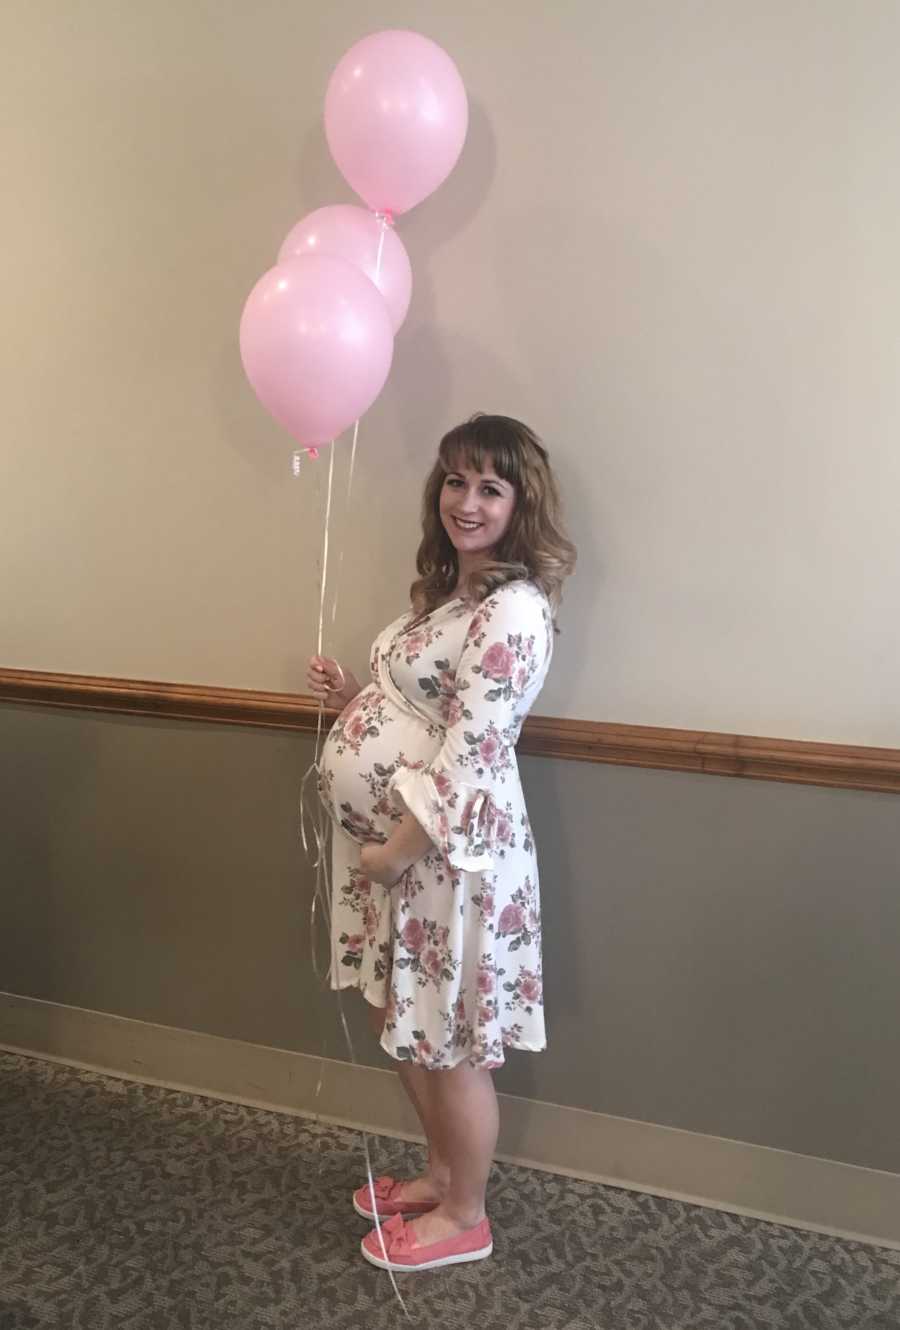 Pregnant woman stands in doctor's office holding pink balloons